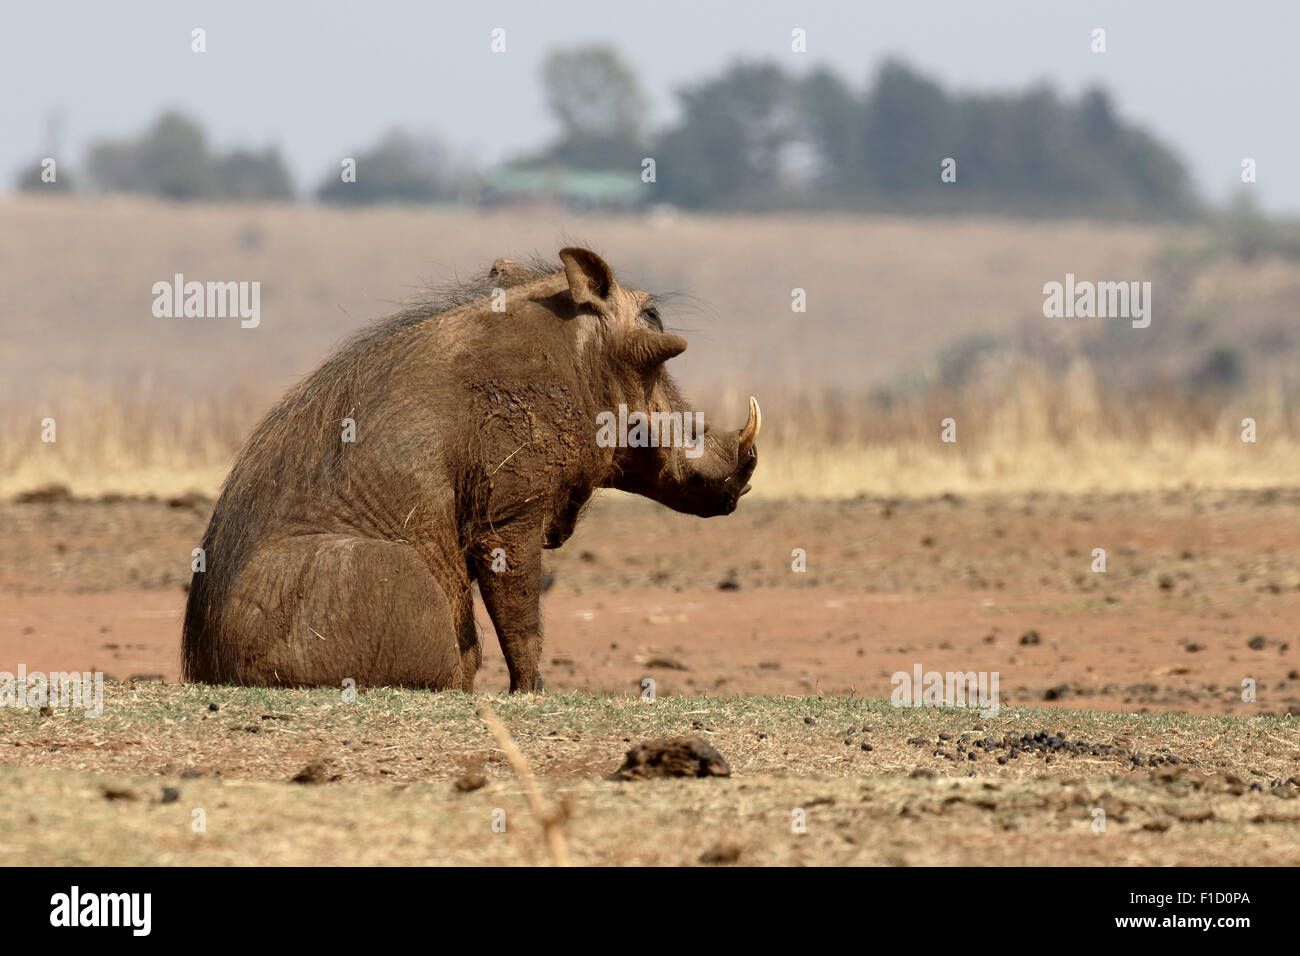 Warthog, Phacochoerus aethiopicus, single mammal, South Africa, August 2015 Stock Photo